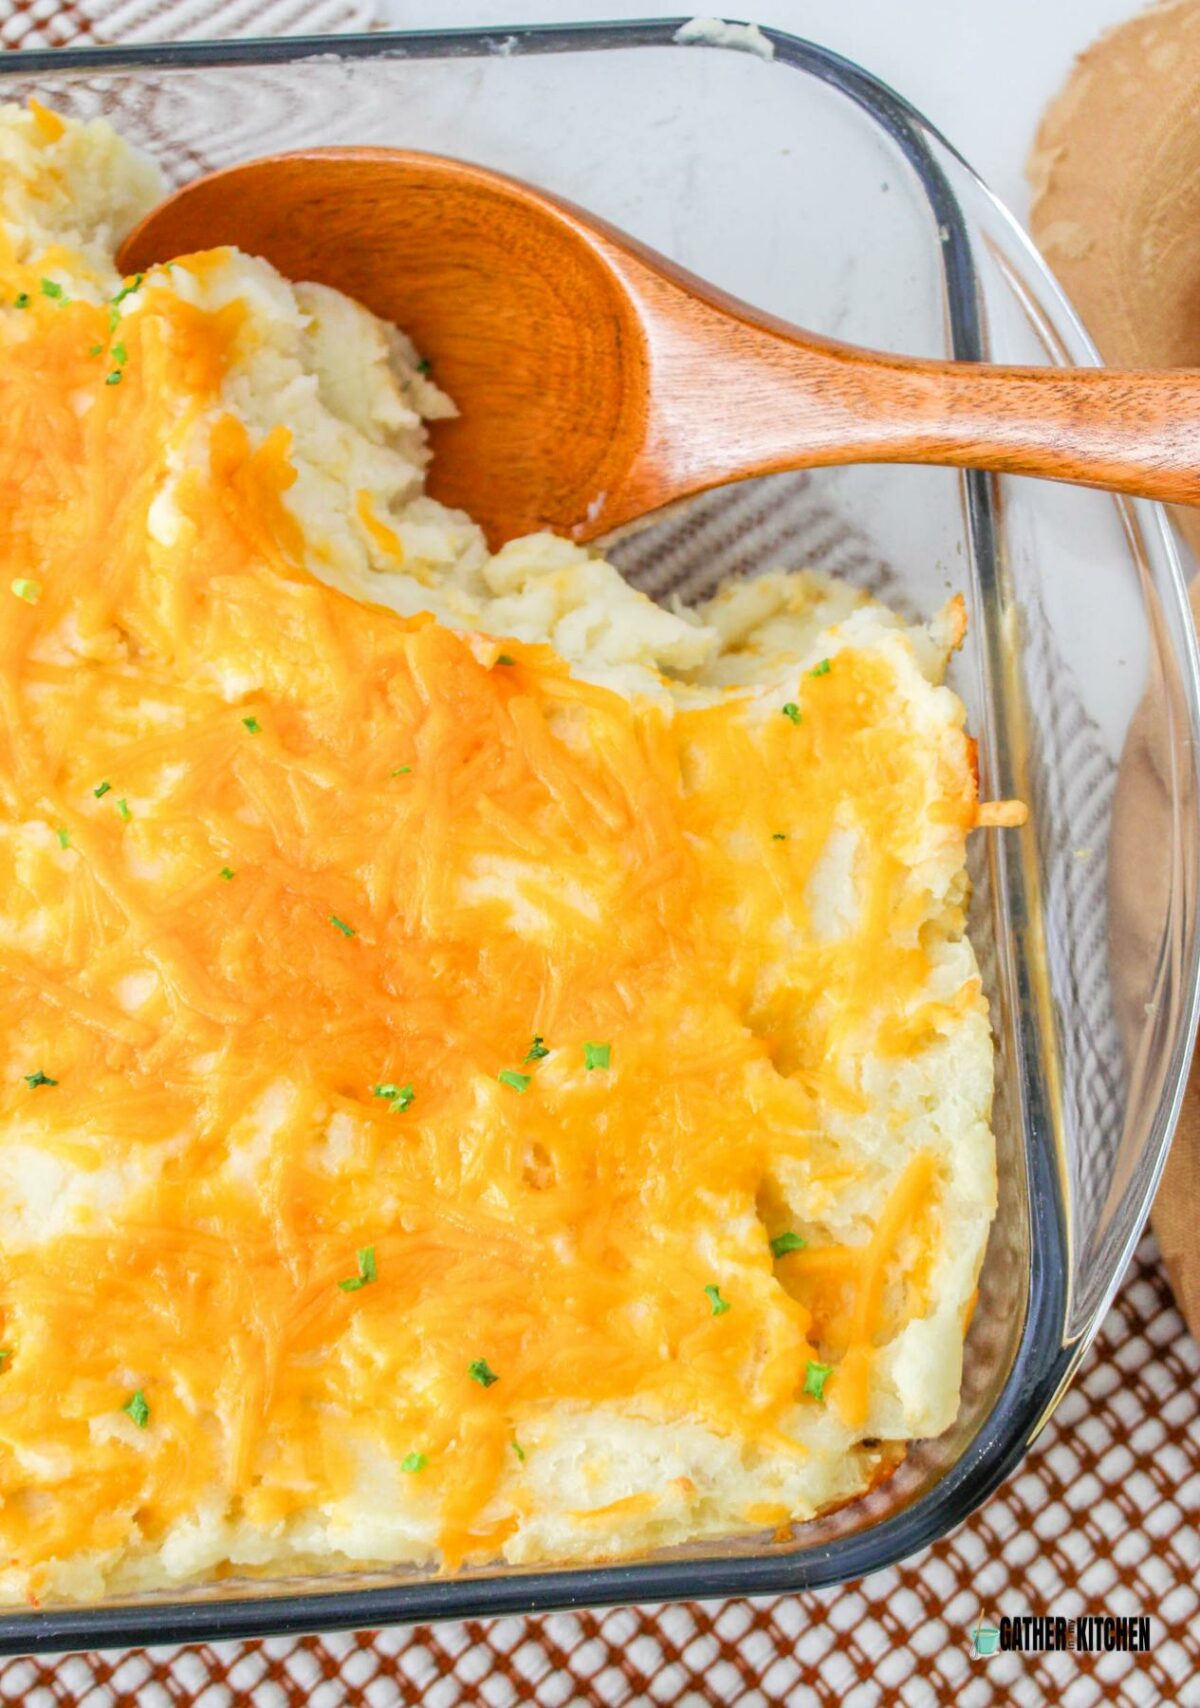 Mashed potato casserole in a baking dish with a serving taken out and a wooden spoon in it.